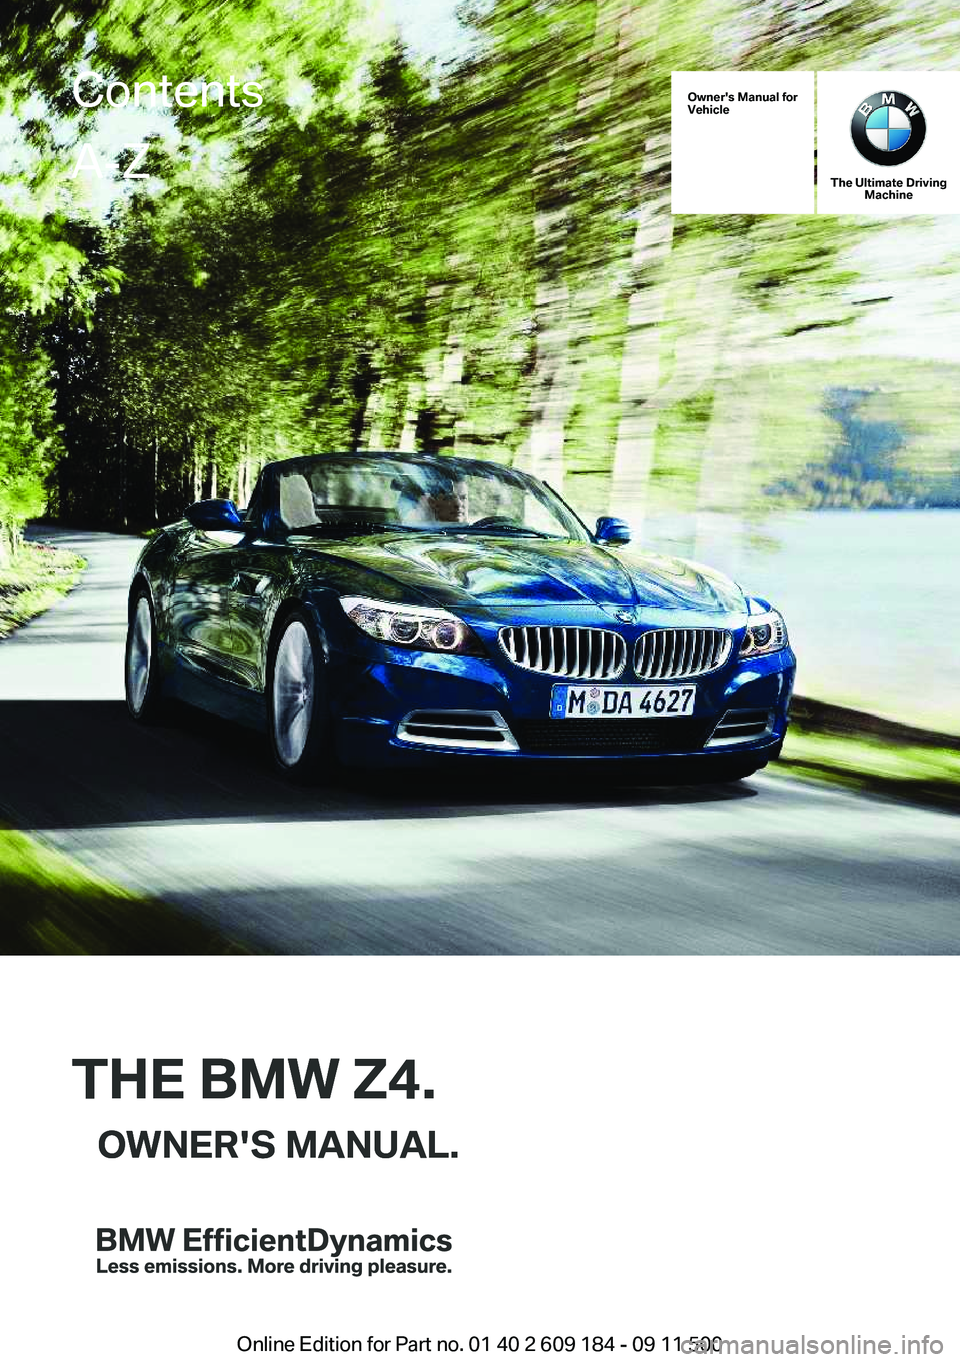 BMW Z4 SDRIVE35I 2012  Owners Manual Owner's Manual for
Vehicle
THE BMW Z4.OWNER'S MANUAL.
The Ultimate Driving Machine
THE BMW Z4.OWNER'S MANUAL.
ContentsA-Z
Online Edition for Part no. 01 40 2 609 184 - 09 11 500   